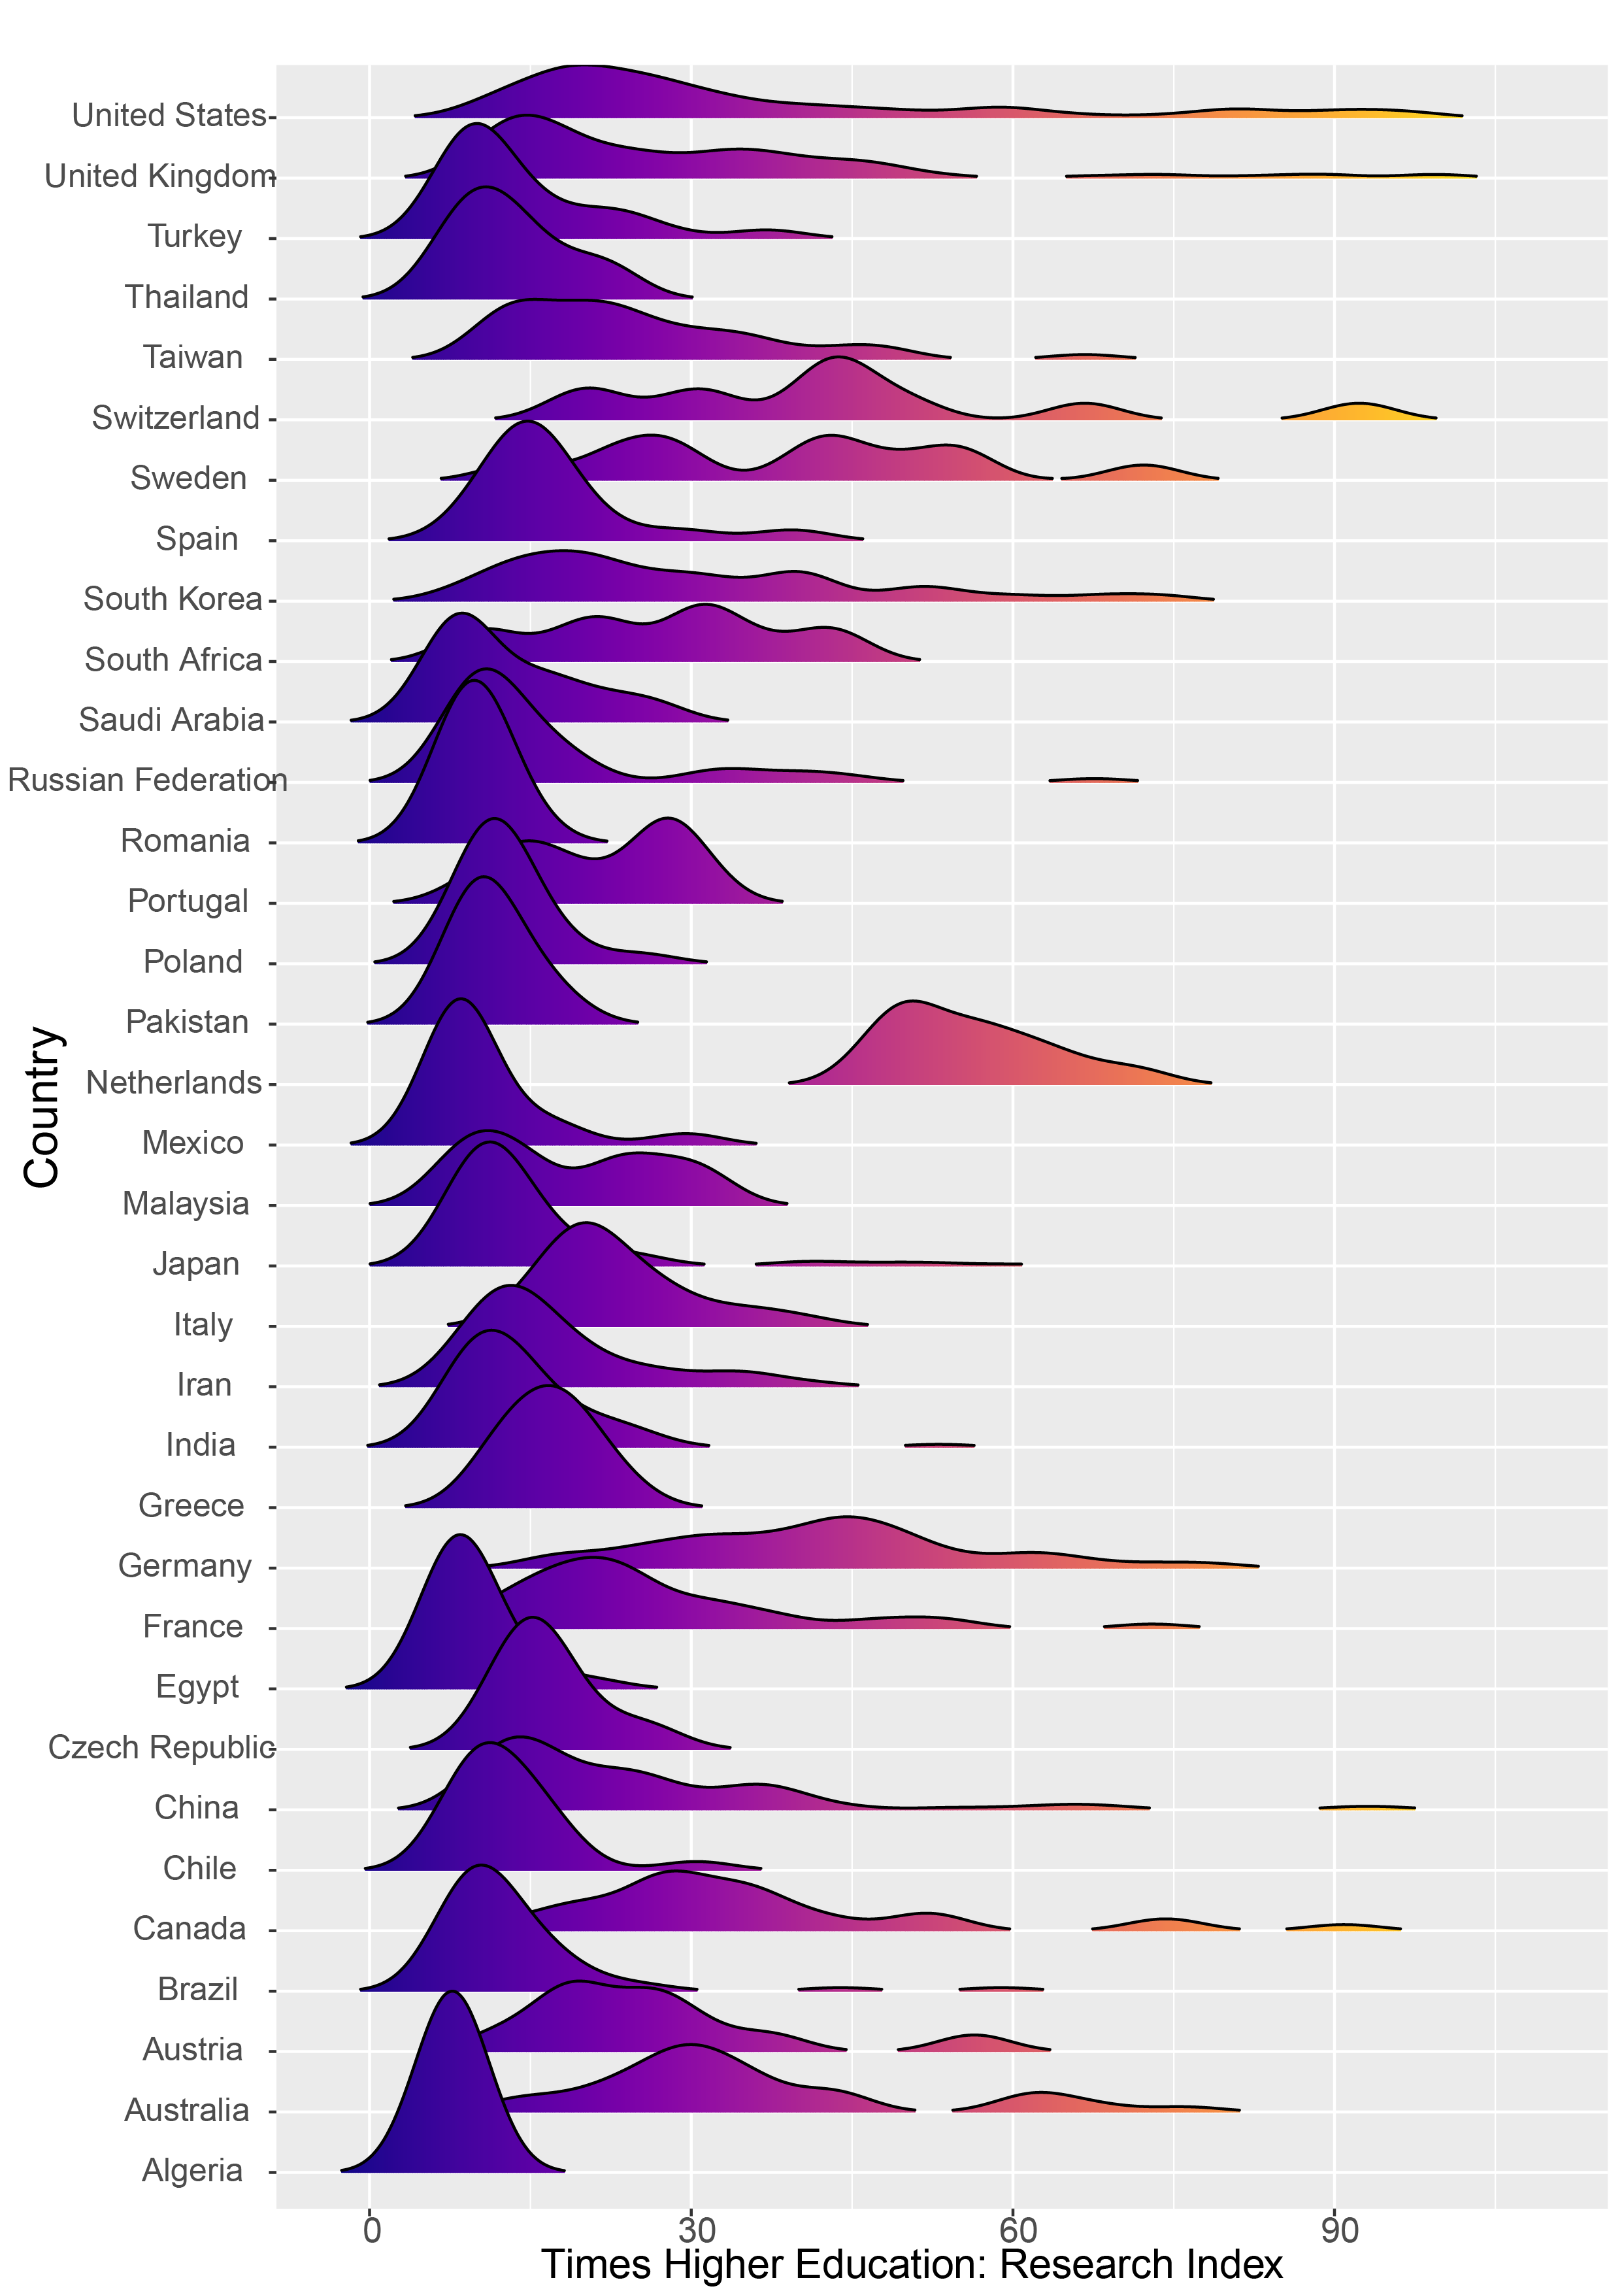 It’s not the country that determines the quality of your university. In this plot, you see the Times Higher Education (THE) World Ranking (2021) score for Research plotted by country (with ≥ 10 universities). Note that most universities in most countries have mean THE Research scores in the lowest quartile. Almost all countries that have institutions in the top quartile, have most of the institutions in that country in the bottom quartile. The point here is that you should look at the quality of the institution that you want to attend, rather than assume that all universities from certain countries have high or low research profiles.